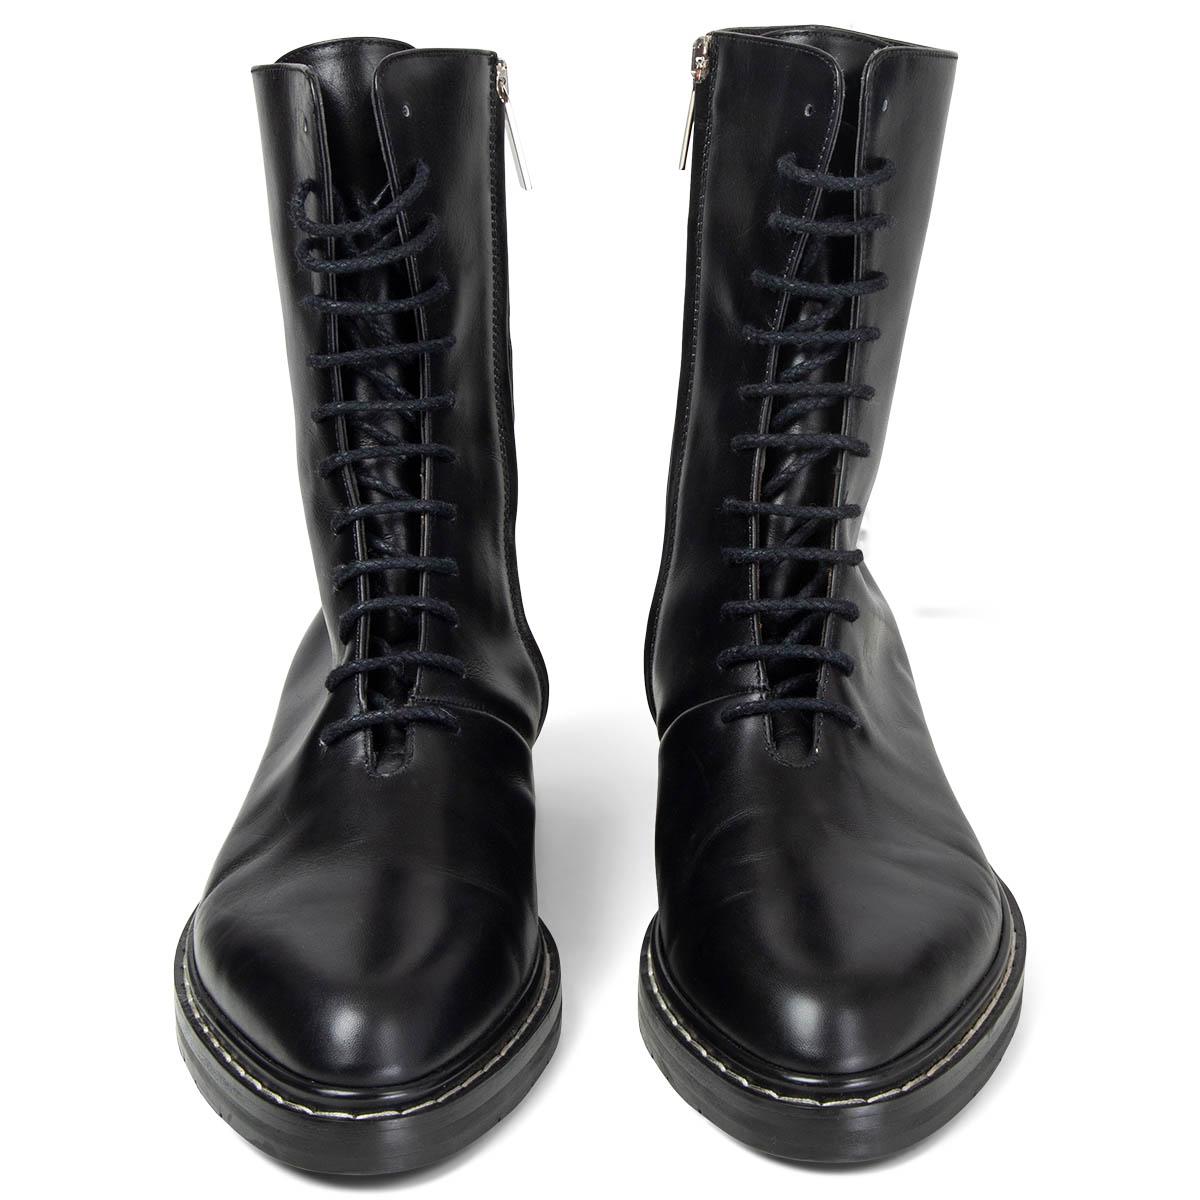 100% authentic The Row Fara lace-up combat boots in black smooth leather with white stitching details. Open with a zipper on the inside. Have been worn once or twice and are in excellent condition. Come with dust bag. 

Measurements
Imprinted